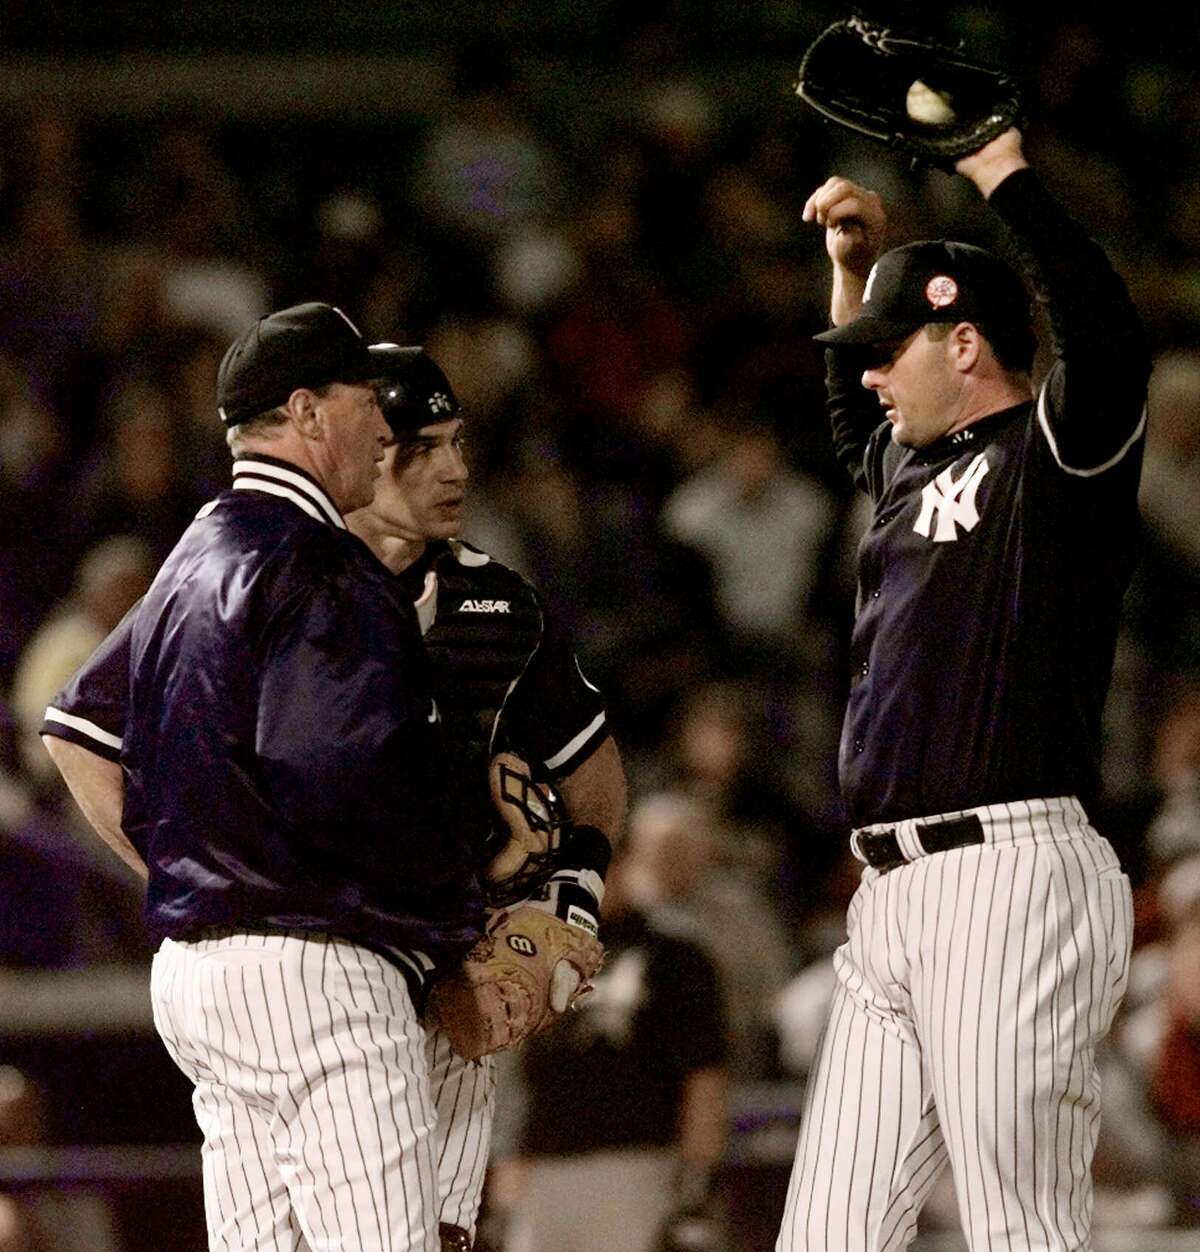 New York Yankees starting pitcher Roger Clemens, right, gets a visit from pitching coach Mel Stottlemyre, left, and catcher Joe Girardi after walking Houston Astros batter Jeff Bagwell with the bases loaded in the second inning Friday, March 26, 1999 at Legends Field in Tampa, Fla. The Yankees lost 7-5. (AP Photo/Ron Frehm)